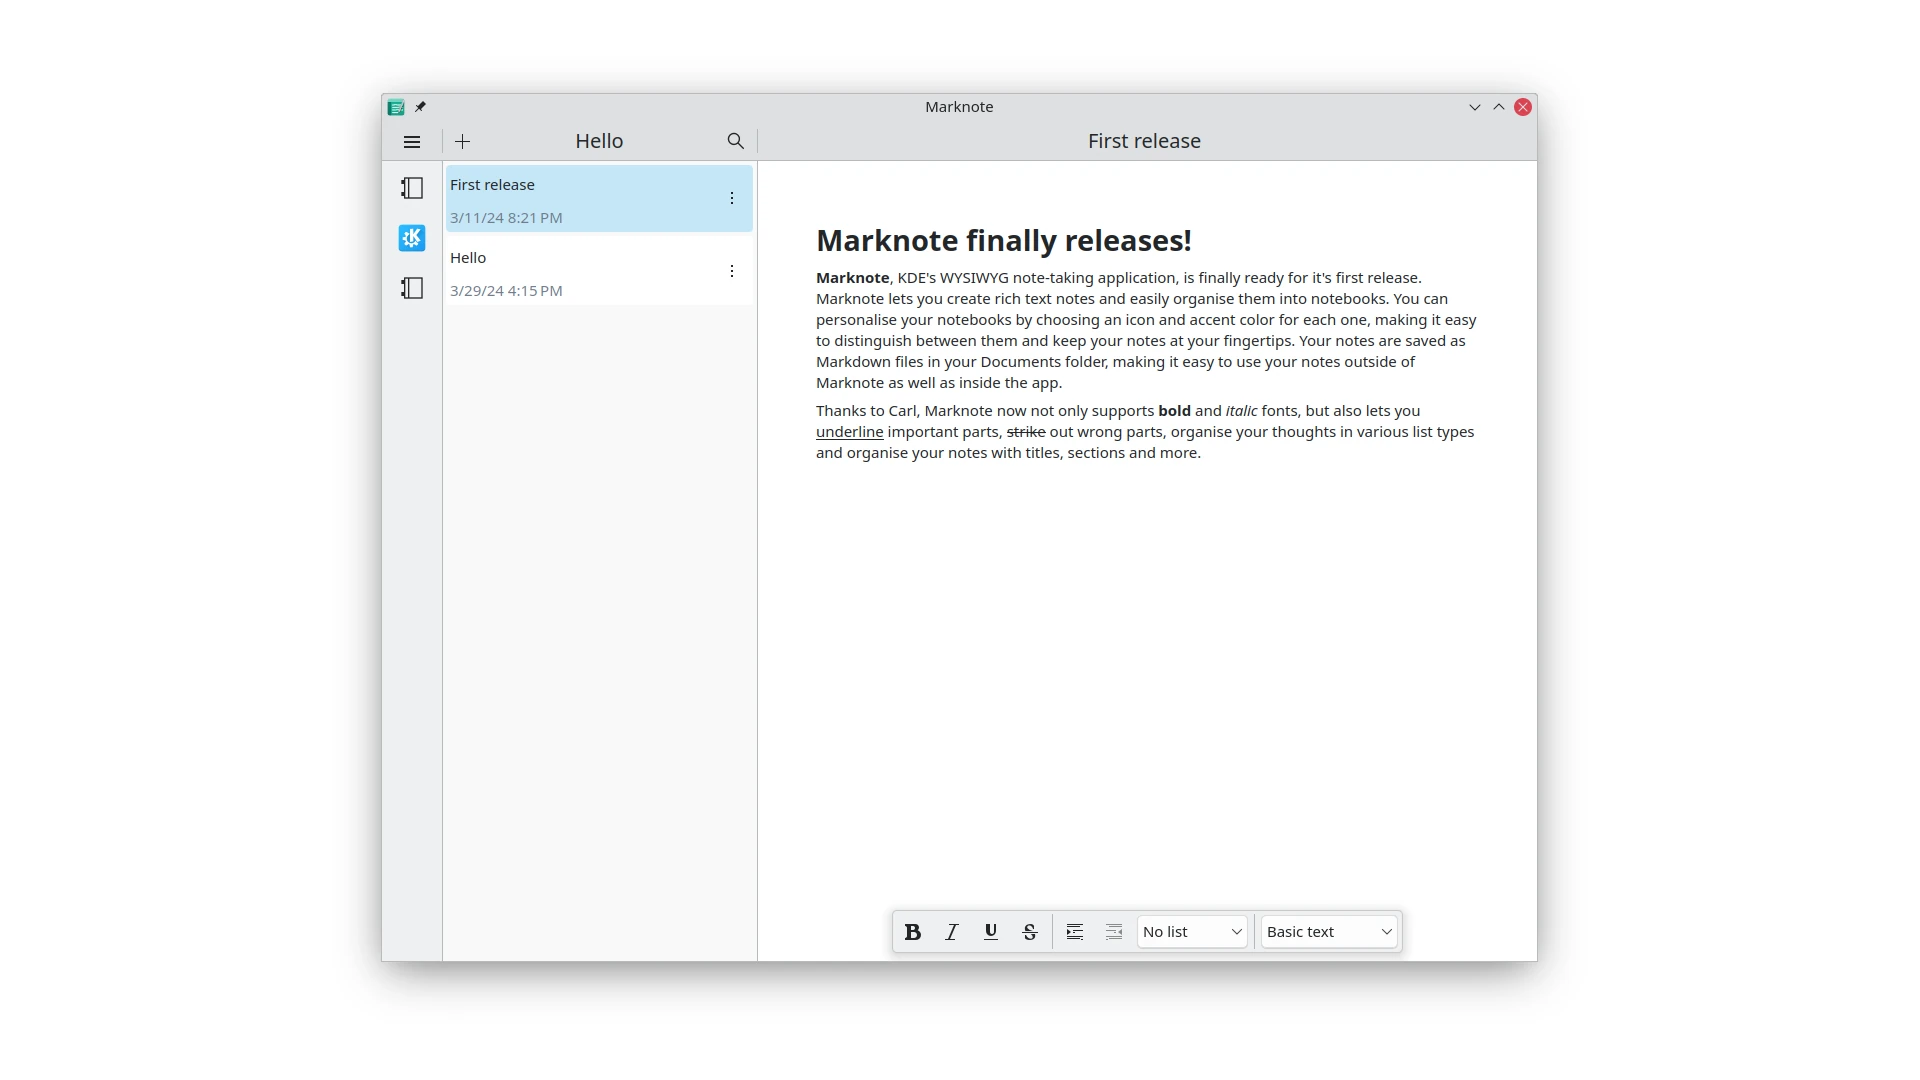 Meet Marknote, KDE’s New WYSIWYG Note-Taking Application for Linux